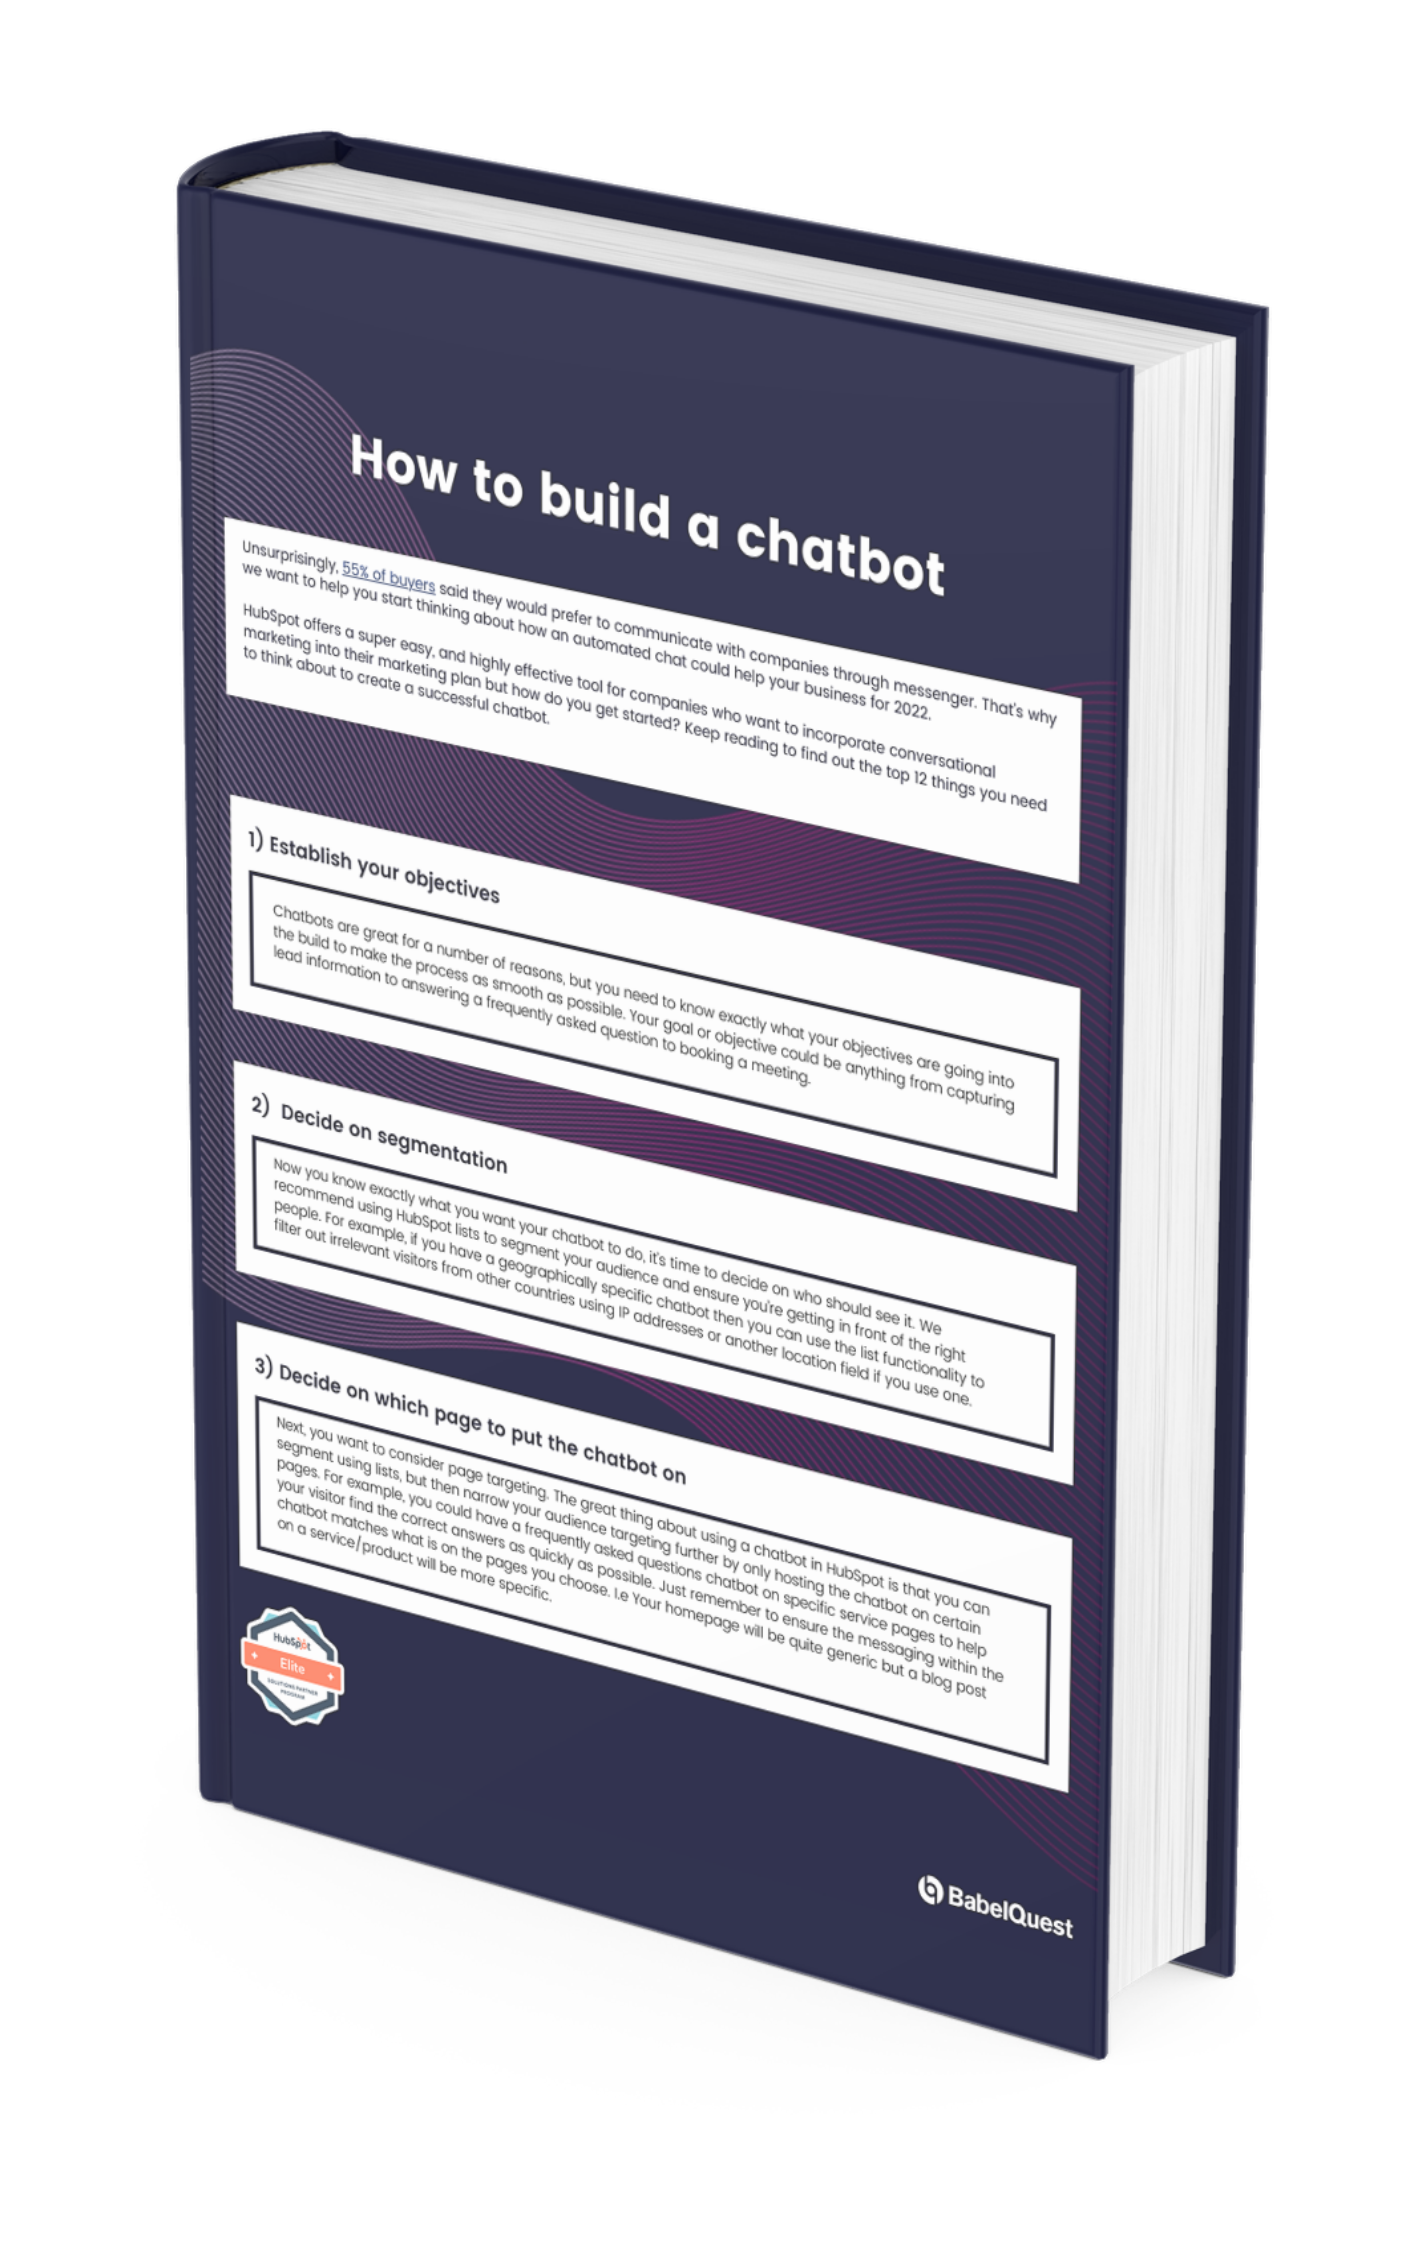 How To Build a Chatbot Checklist